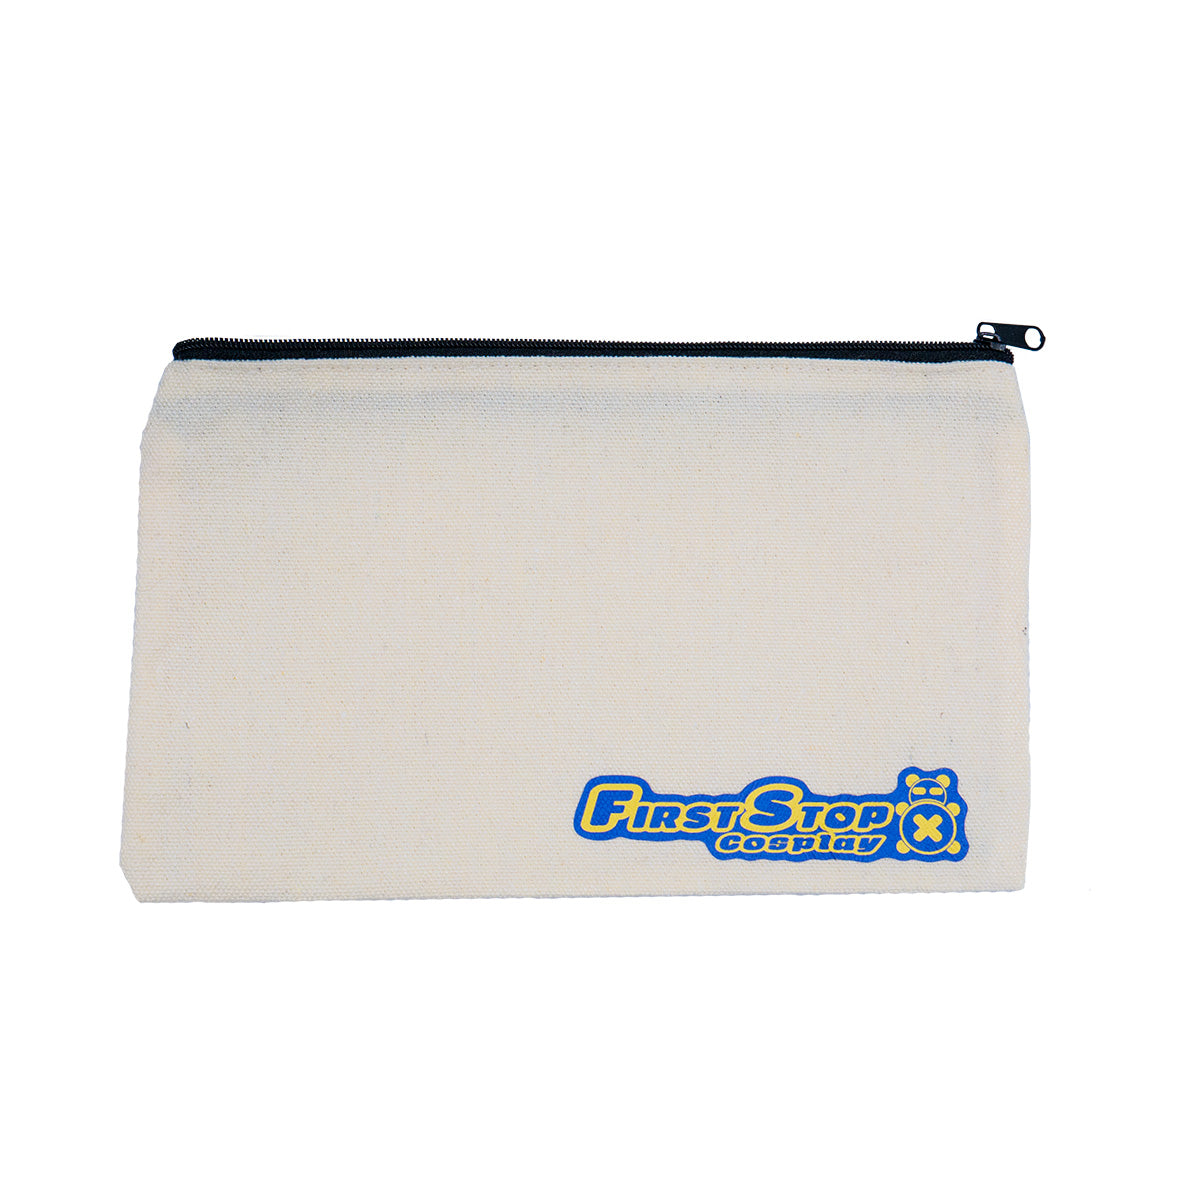 The First Stop Cosplay canvas zipper pouch. It is a cream-colored pouch with black zipper on top. On the bottom right of the pouch is the logo, reading, "First Stop Cosplay" next to the Timmy icon.